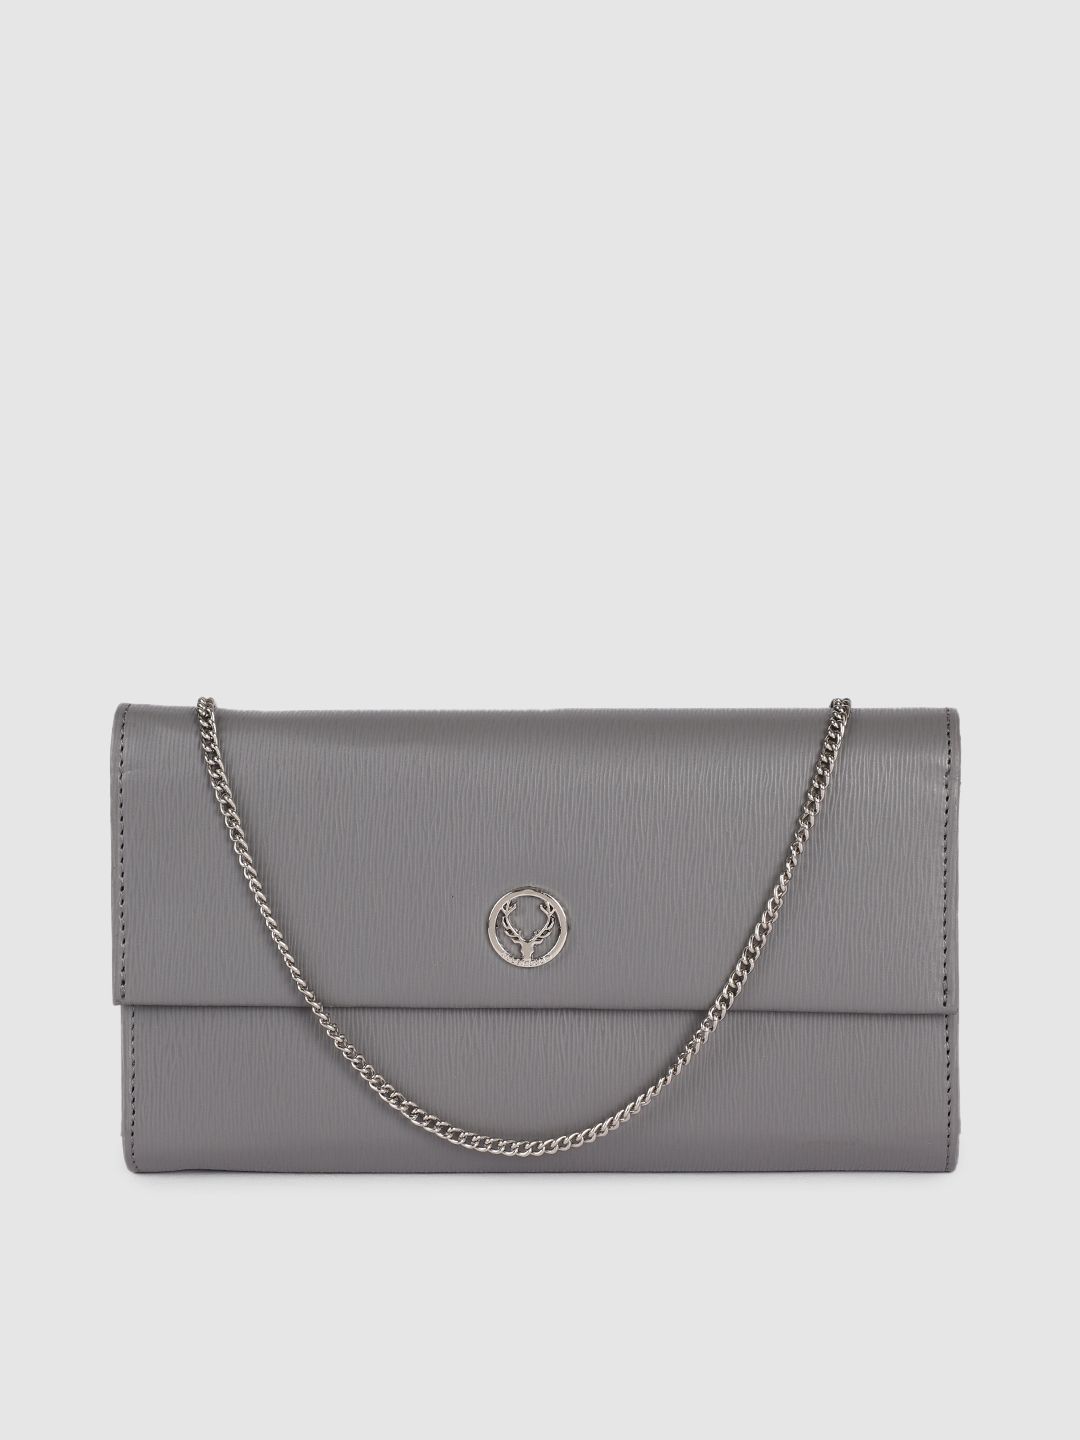 Allen Solly Women Grey PU Two Fold Wallet Price in India